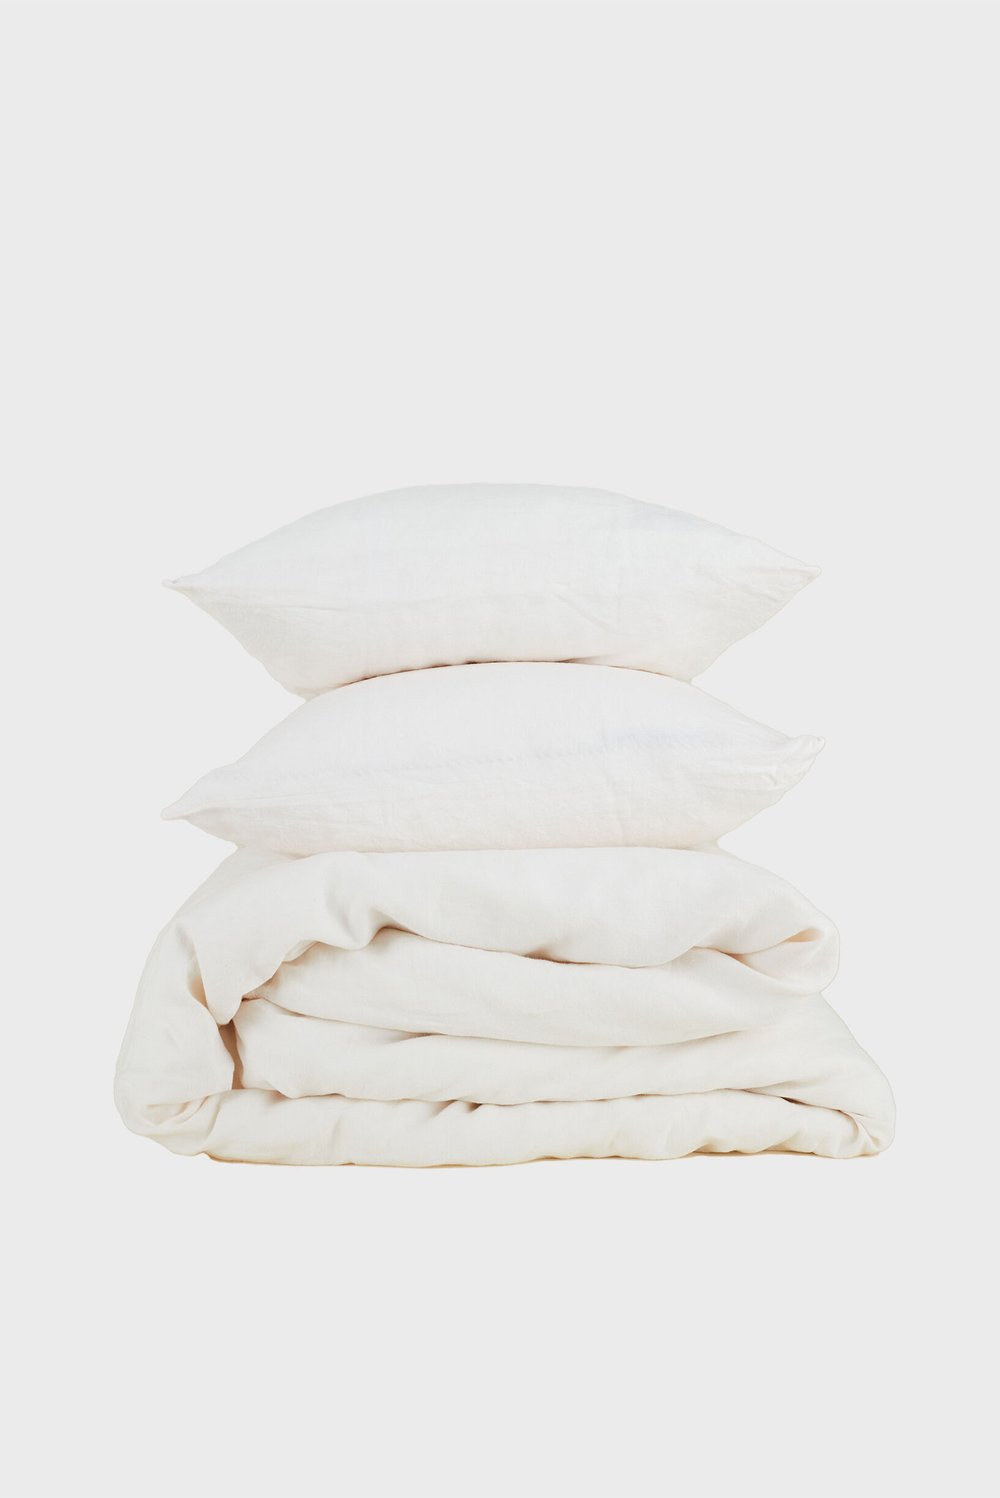 Hawkins New York Simple Linen Fitted Sheet - Petal | Size: King